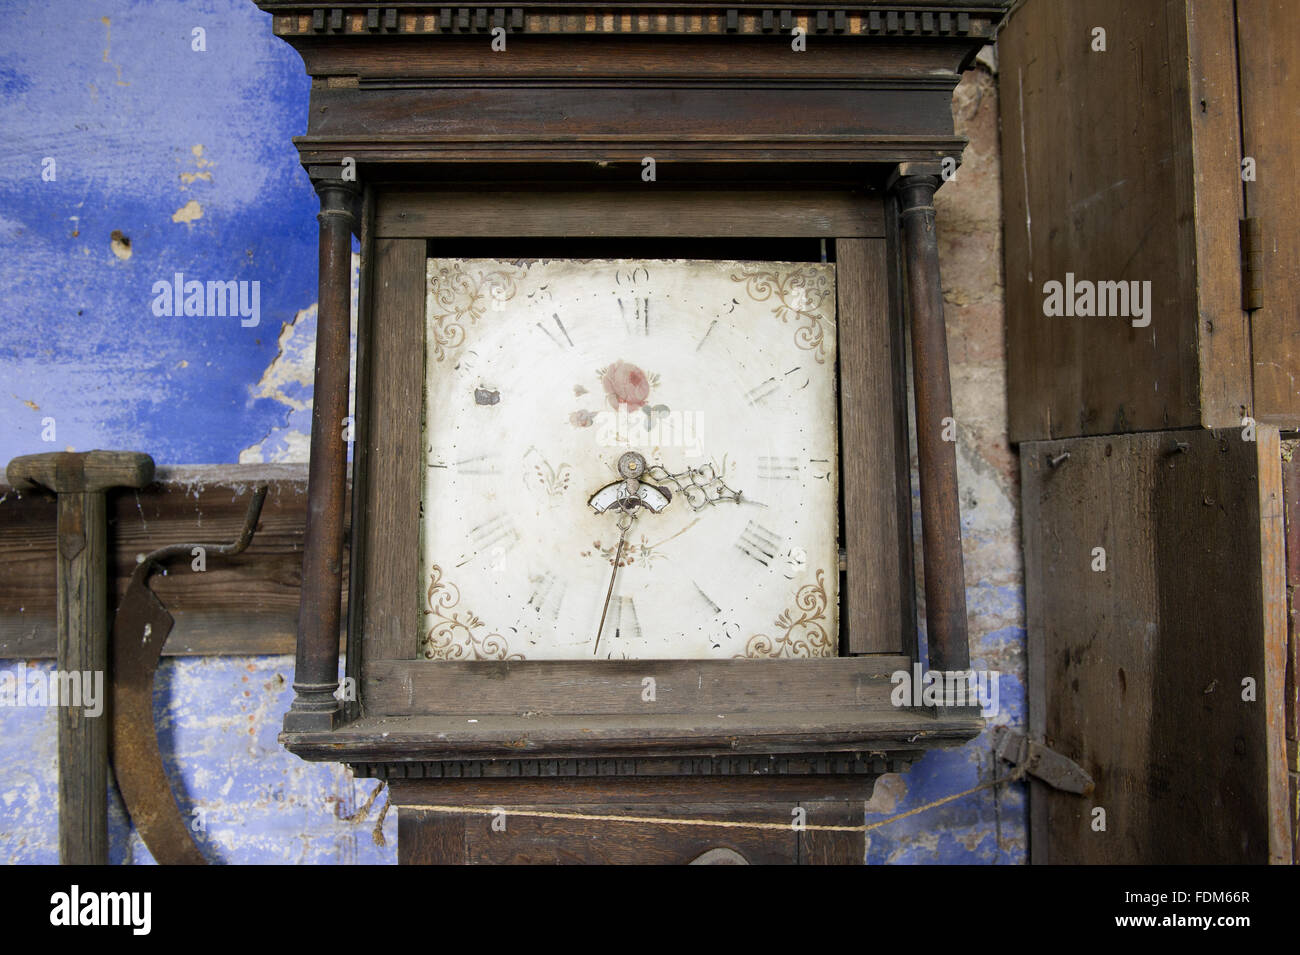 Old grandfather clock in the Gardener's Bothy at Calke Abbey, Derbyshire. Stock Photo